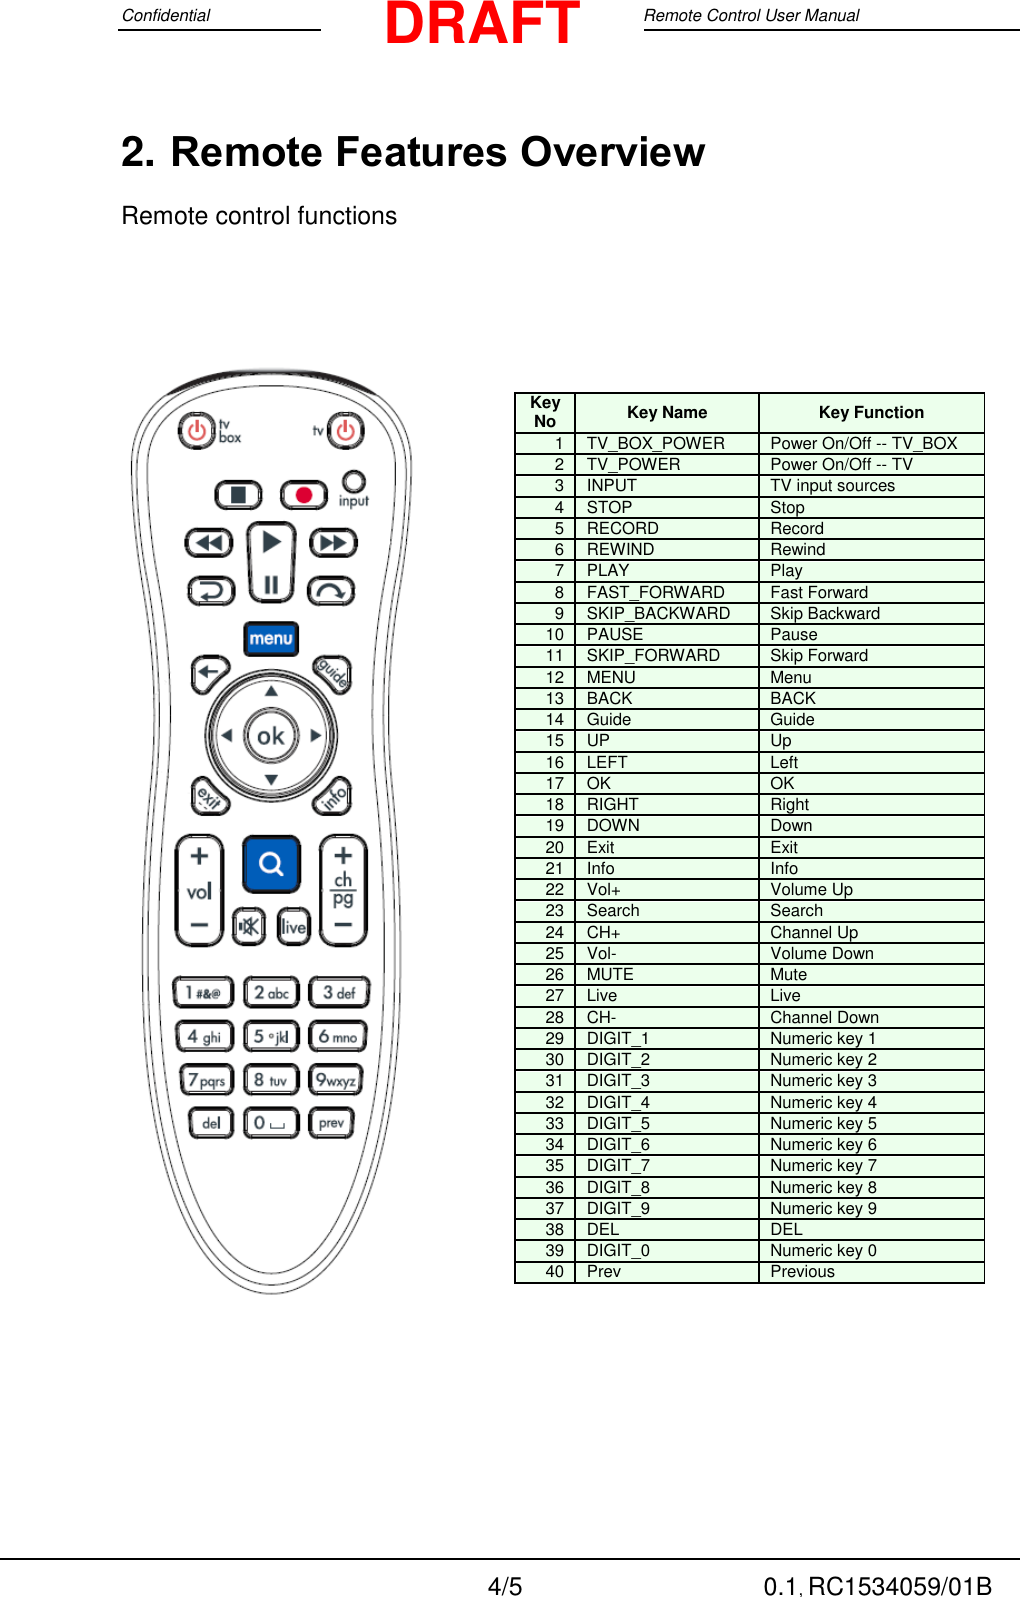 Confidential                                                                                 Google Remote Control User Manual  4/5 0.1, RC1534059/01B DRAFT 2. Remote Features Overview Remote control functions        Key No Key Name Key Function 1 TV_BOX_POWER Power On/Off -- TV_BOX 2 TV_POWER Power On/Off -- TV 3 INPUT TV input sources 4 STOP Stop 5 RECORD Record 6 REWIND Rewind 7 PLAY Play 8 FAST_FORWARD Fast Forward 9 SKIP_BACKWARD Skip Backward 10 PAUSE Pause 11 SKIP_FORWARD Skip Forward 12 MENU Menu 13 BACK BACK 14 Guide Guide 15 UP Up 16 LEFT Left 17 OK OK 18 RIGHT Right 19 DOWN Down 20 Exit Exit 21 Info Info 22 Vol+ Volume Up 23 Search Search 24 CH+ Channel Up 25 Vol- Volume Down 26 MUTE Mute 27 Live Live 28 CH- Channel Down 29 DIGIT_1 Numeric key 1 30 DIGIT_2 Numeric key 2 31 DIGIT_3 Numeric key 3 32 DIGIT_4 Numeric key 4 33 DIGIT_5 Numeric key 5 34 DIGIT_6 Numeric key 6 35 DIGIT_7 Numeric key 7 36 DIGIT_8 Numeric key 8 37 DIGIT_9 Numeric key 9 38 DEL DEL 39 DIGIT_0 Numeric key 0 40 Prev Previous  